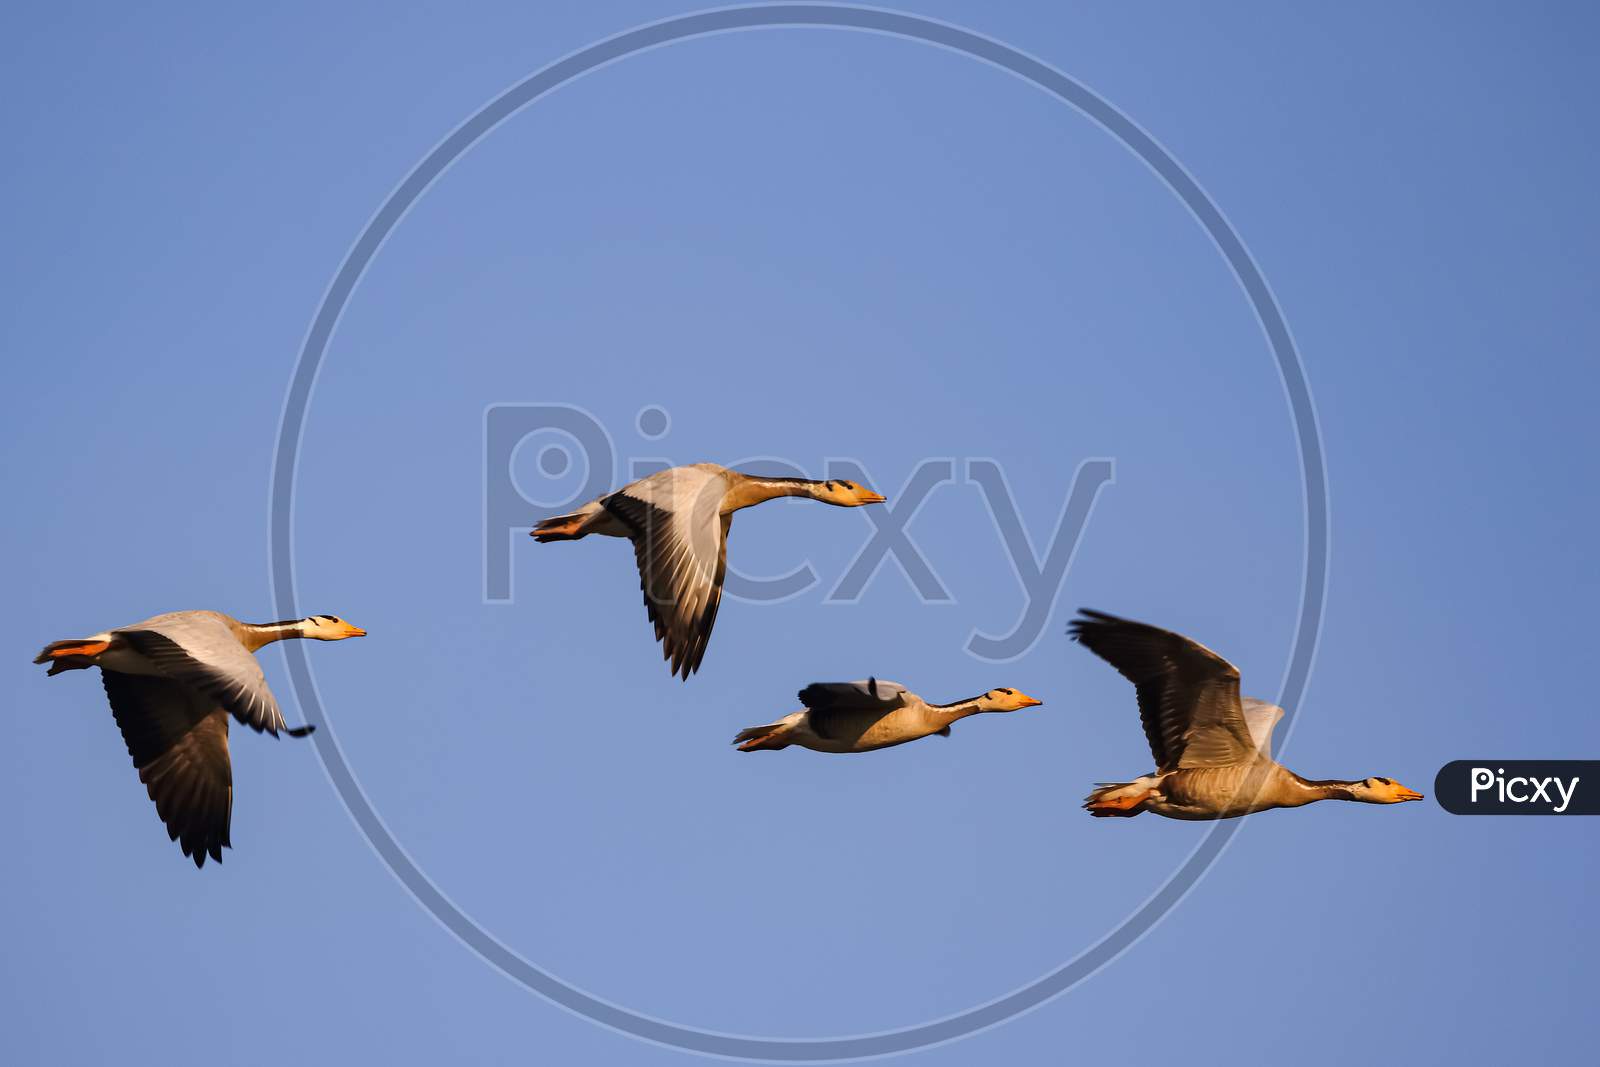 Four bar headed goose flying in a symmetry